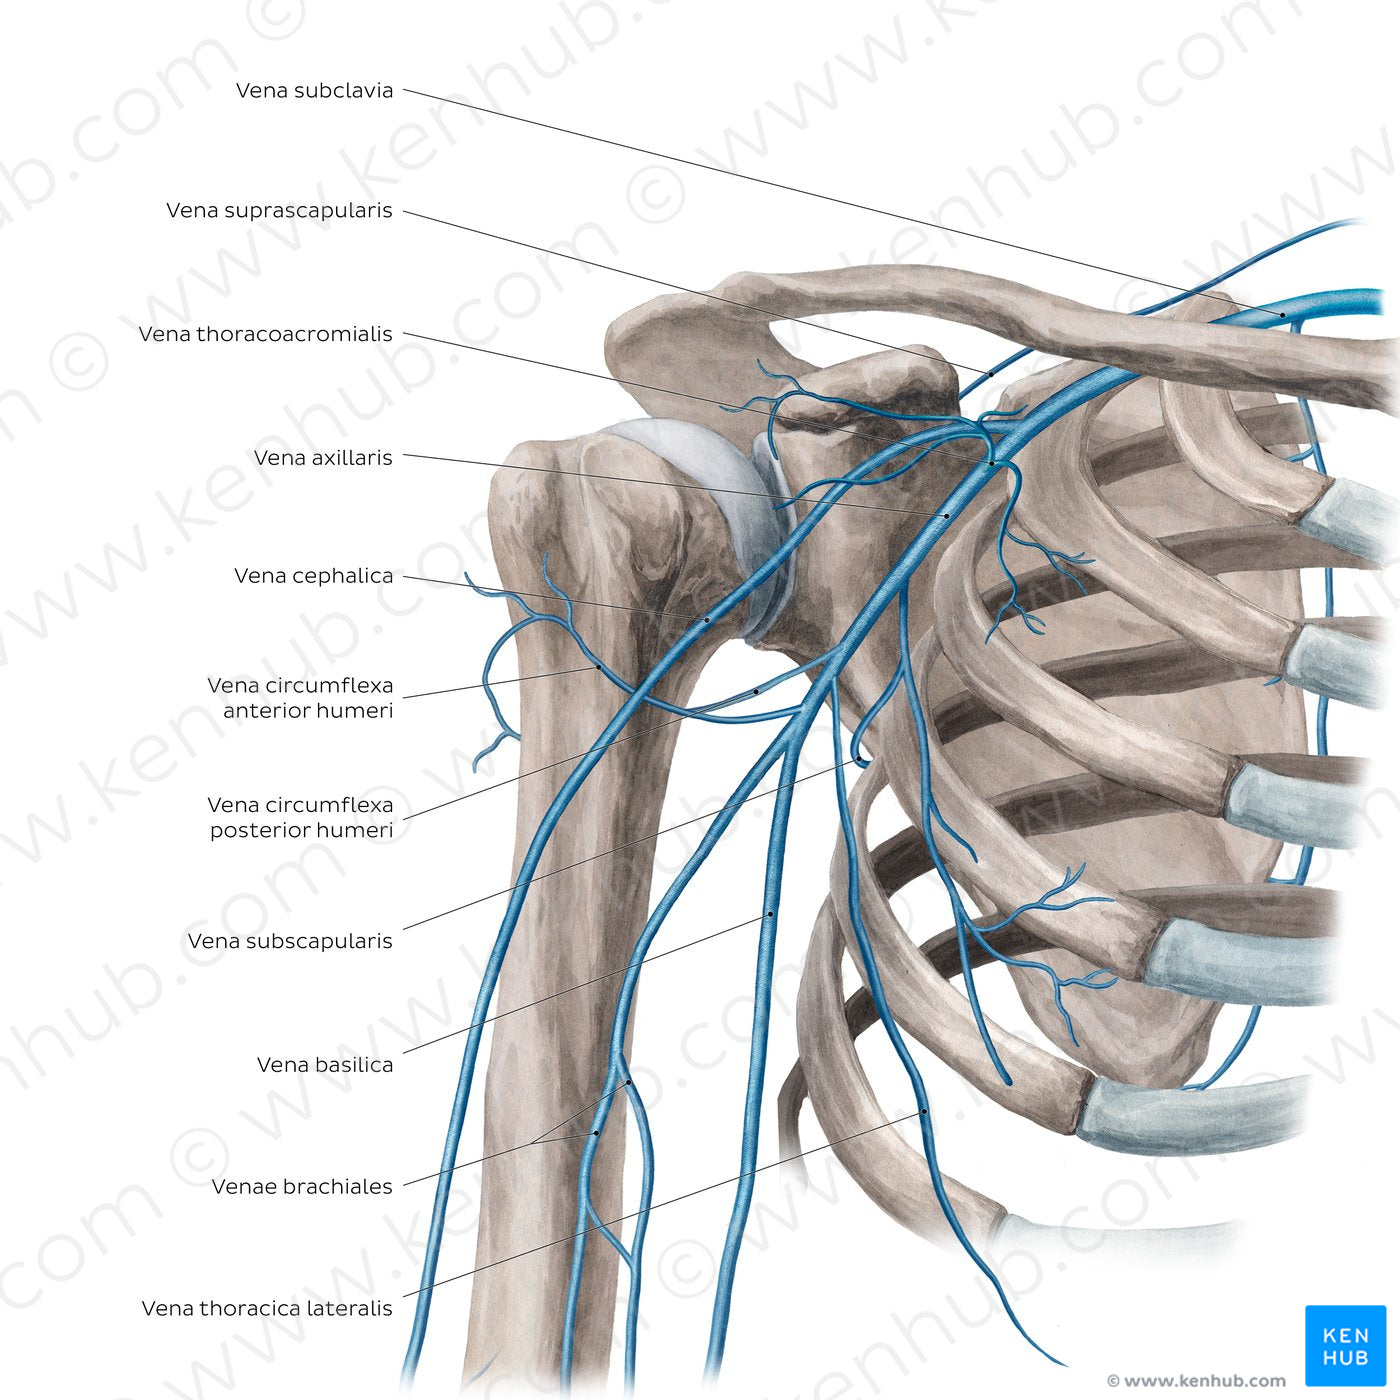 Veins of the arm and the shoulder - Anterior view (Latin)